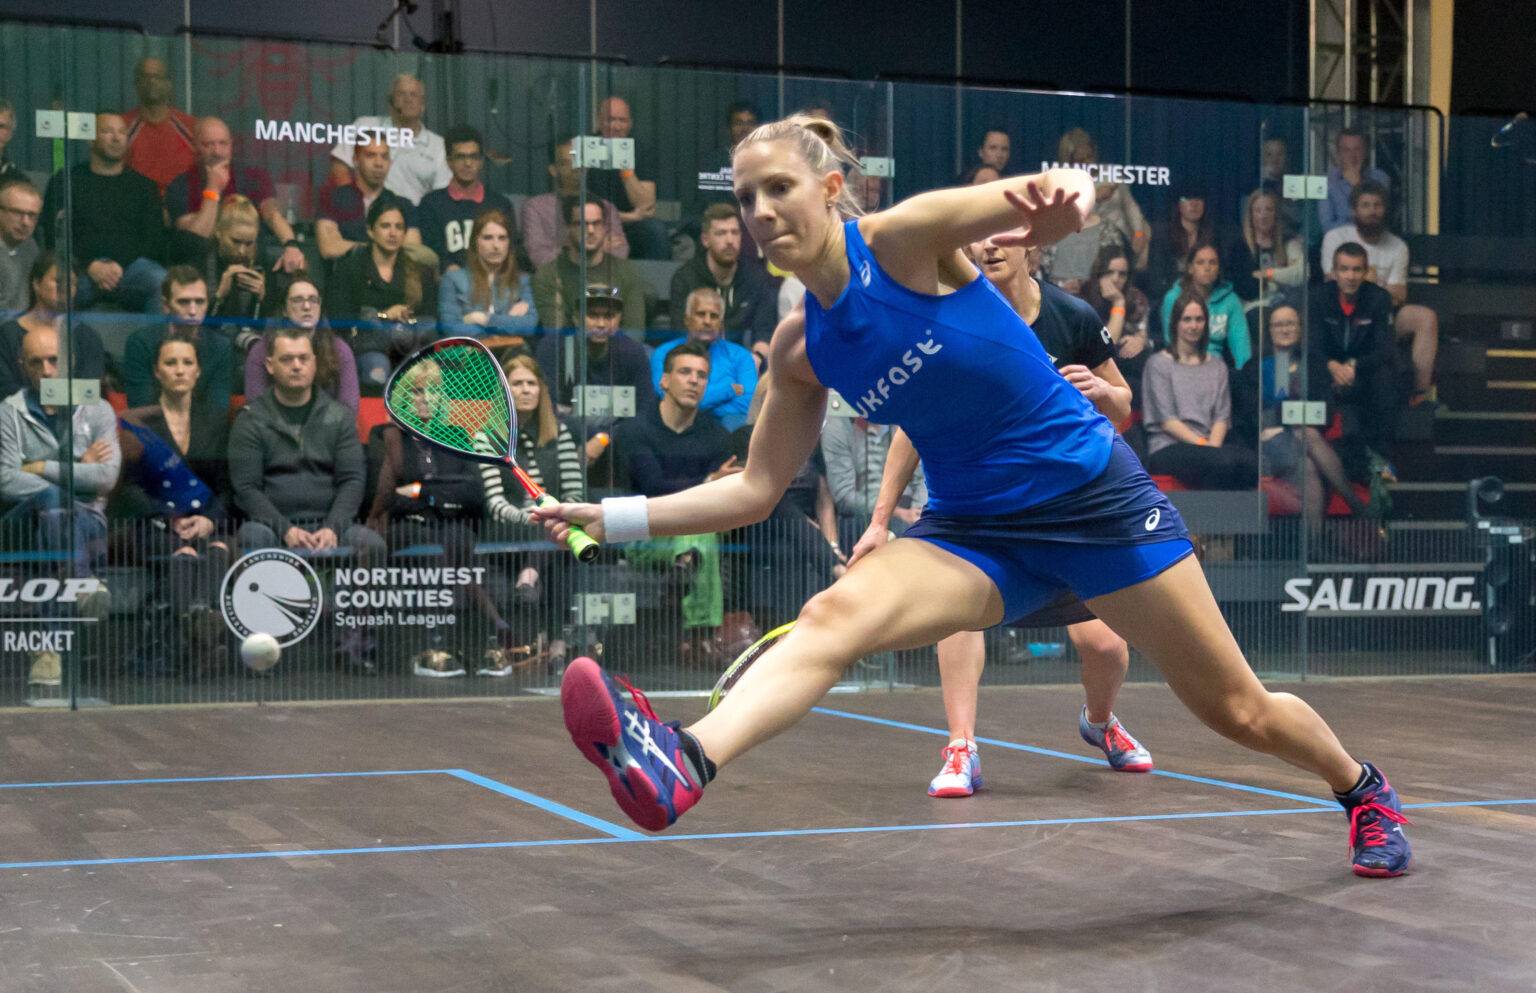 Dancing with delight as squash finally gets squeezed into the Olympic Games